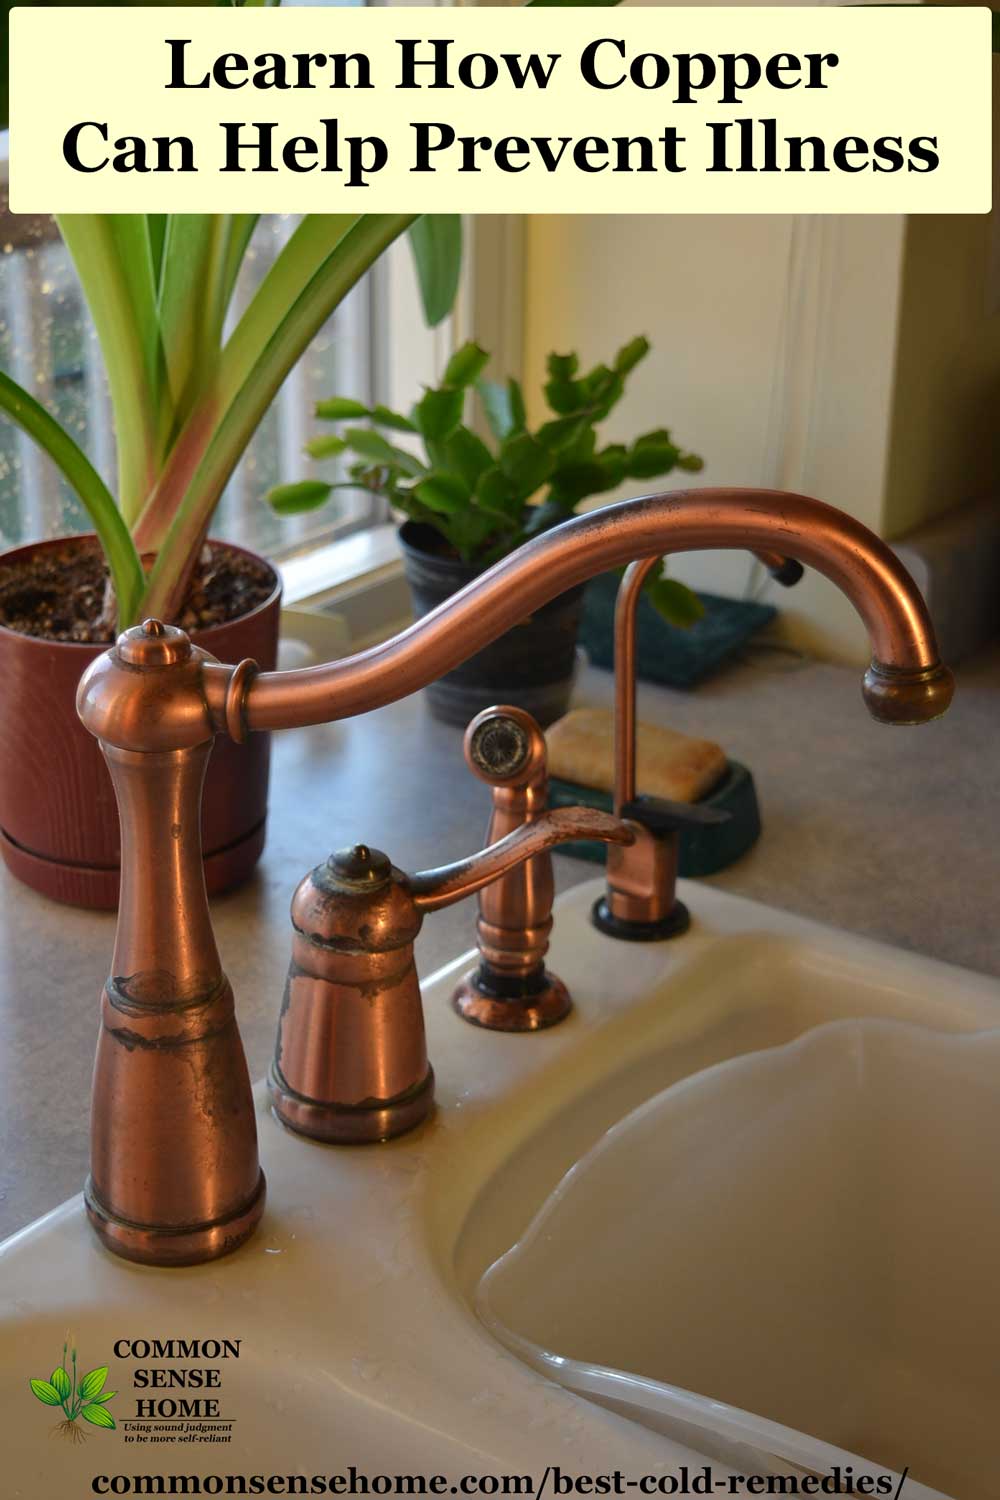 Copper kitchen faucet with text "Learn How Copper Can Help Prevent Illness"